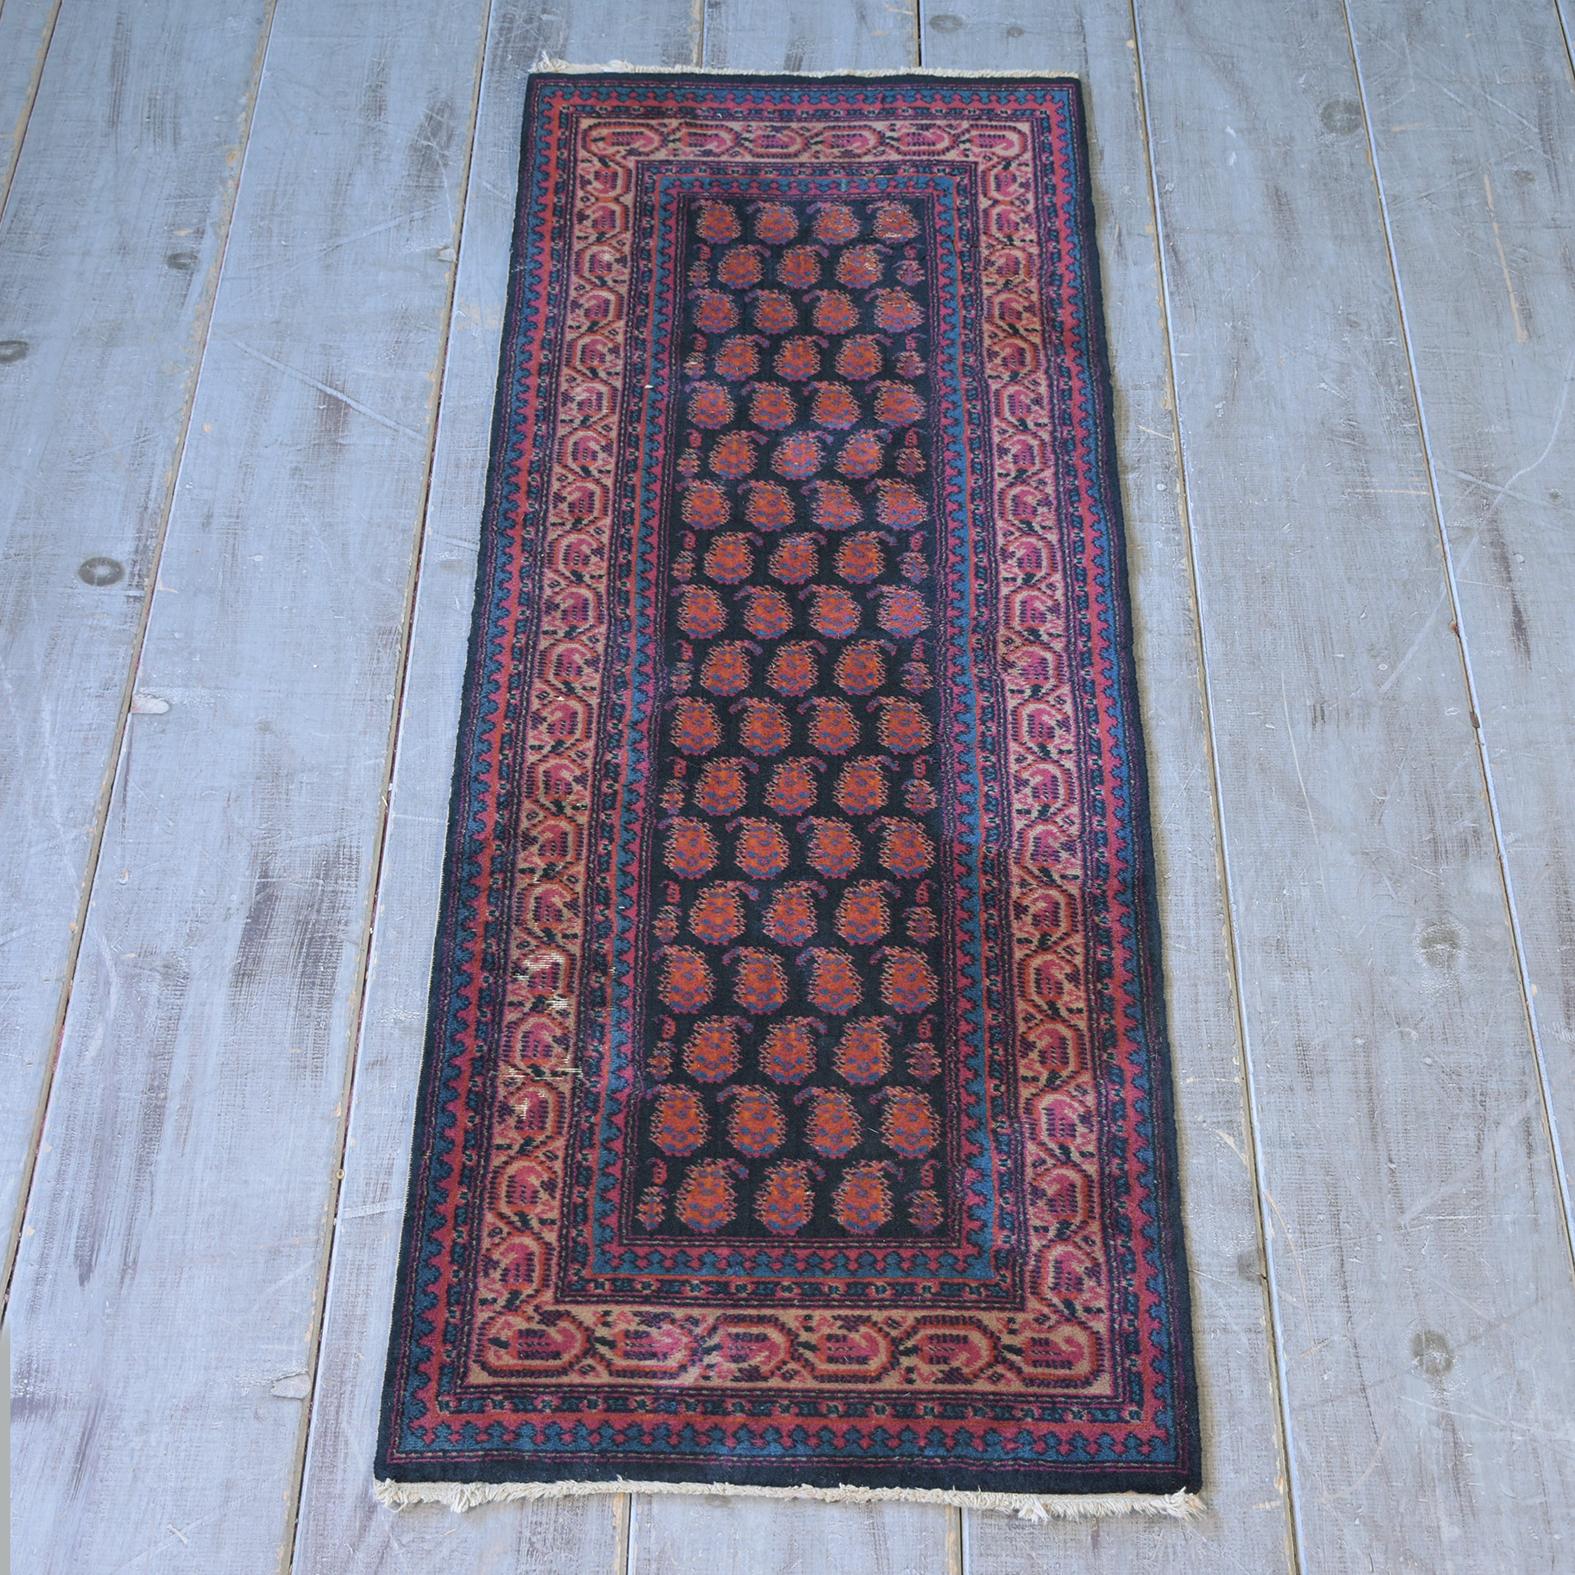 An extraordinary vintage rug hand-crafted out of wood in good condition this piece features vivid colors and a beautiful pattern design perfect addition for a living room space decor ready to be enjoy an used for many years to come,